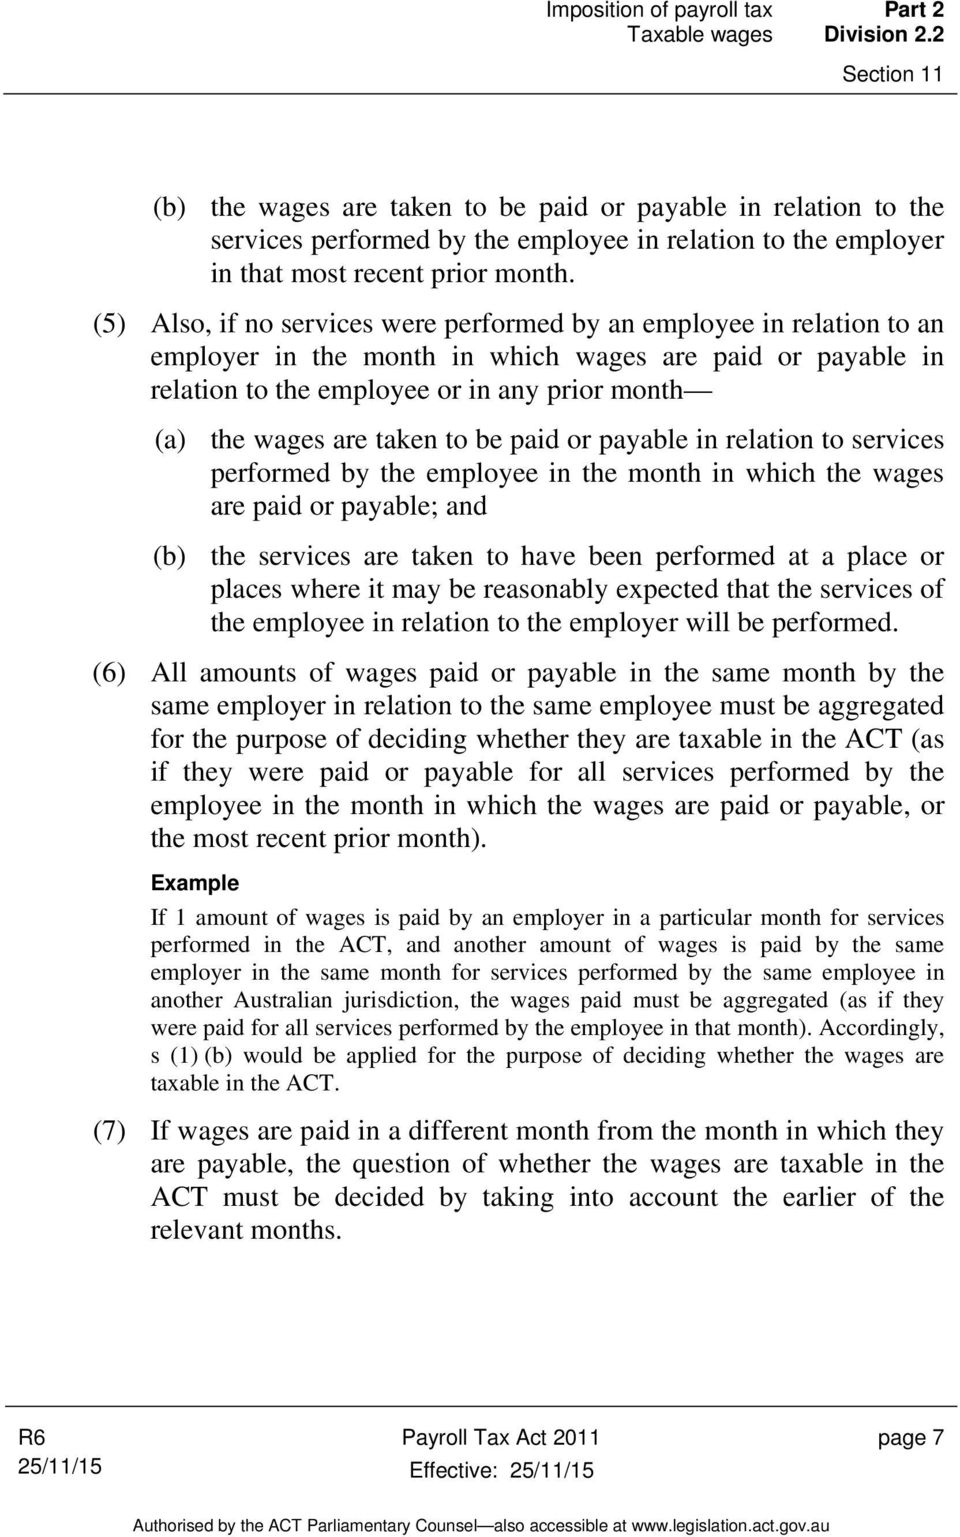 (5) Also, if no services were performed by an employee in relation to an employer in the month in which wages are paid or payable in relation to the employee or in any prior month (a) the wages are